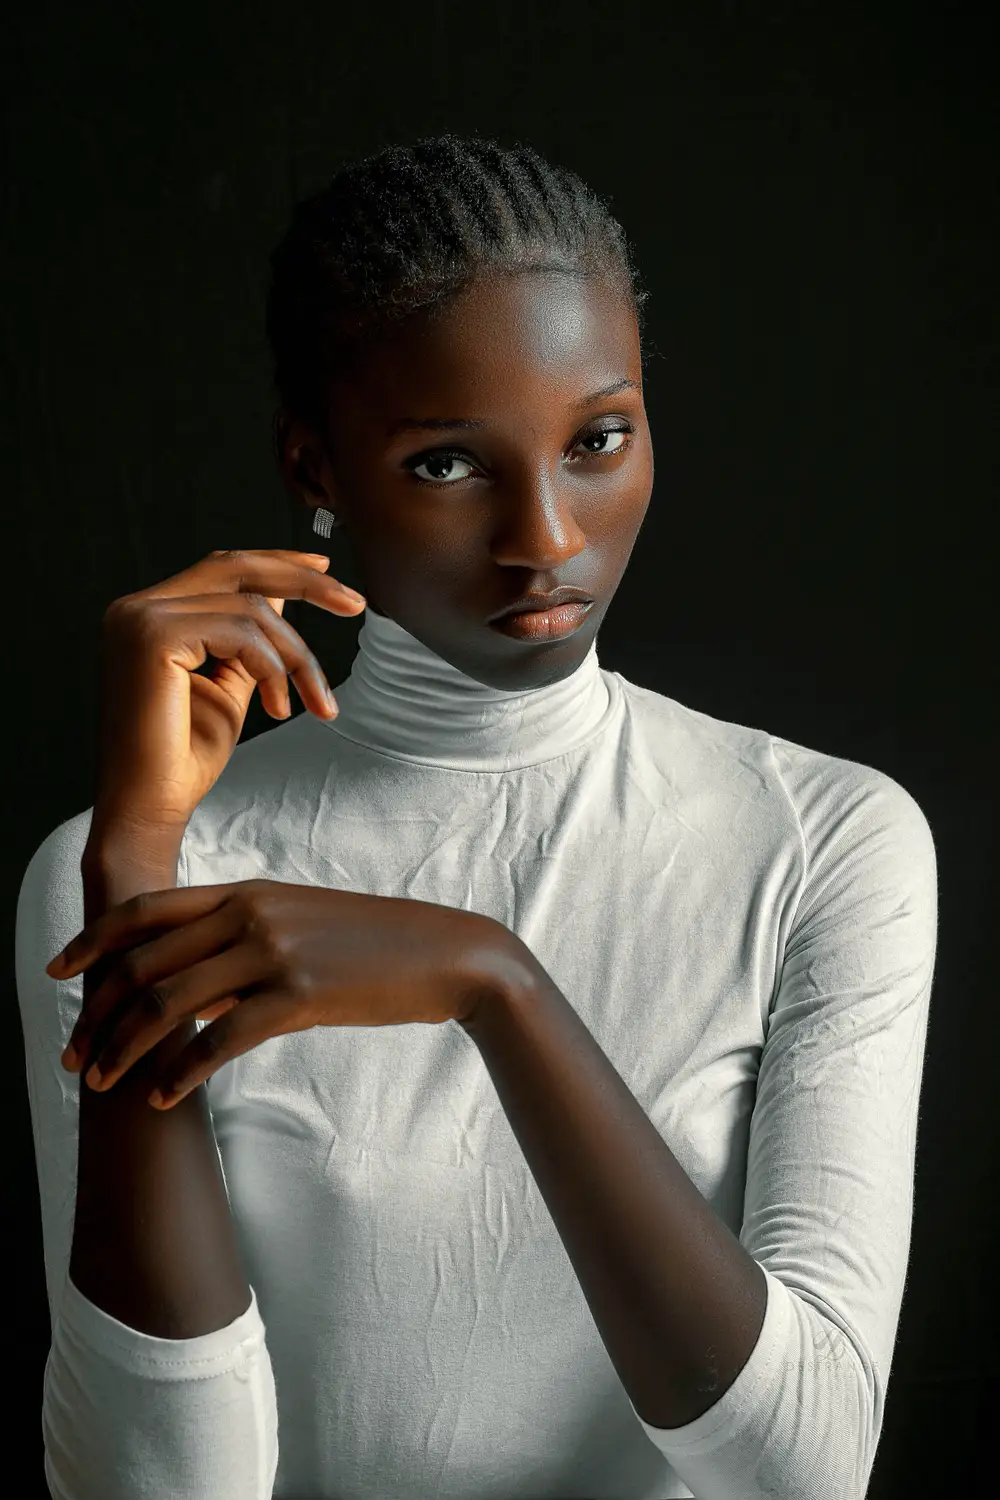 A Lady Model in White Turtle neck top